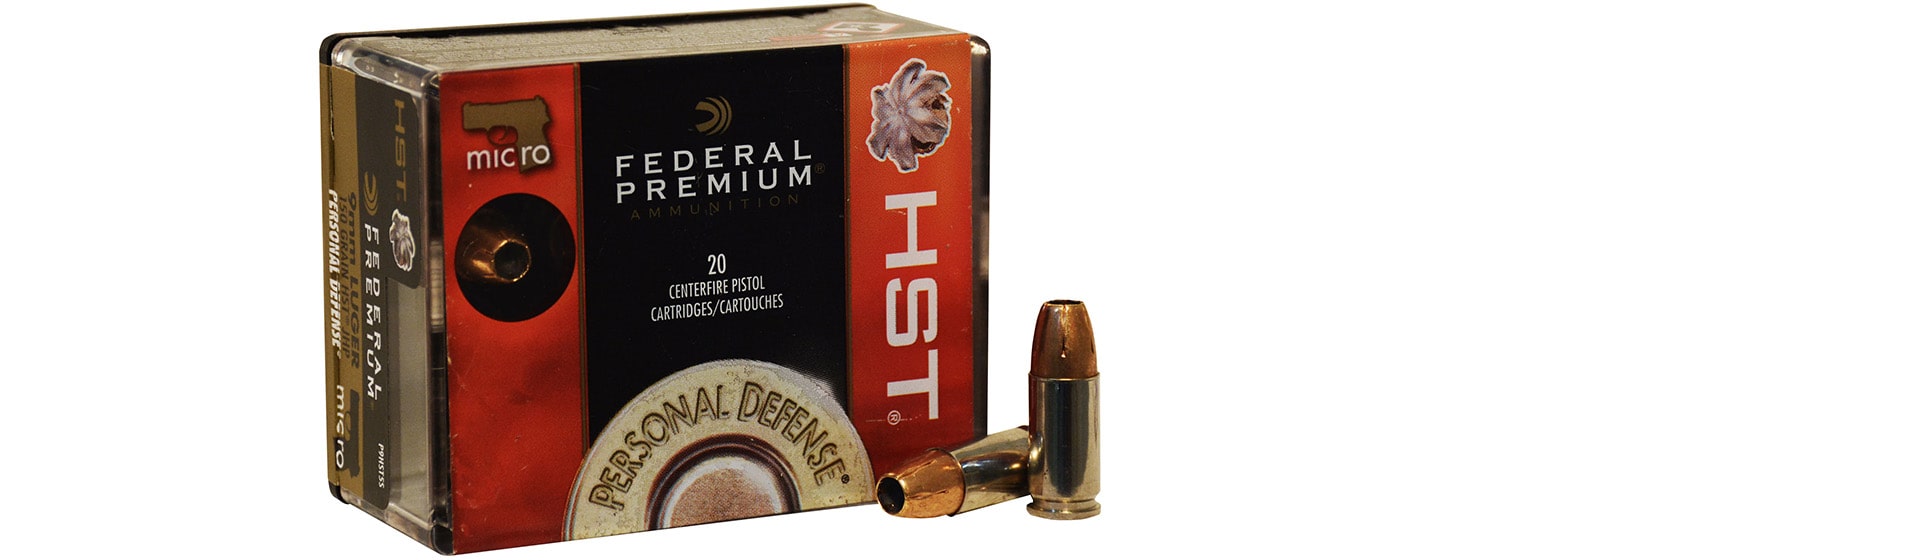 Federal HST Micro Ammo